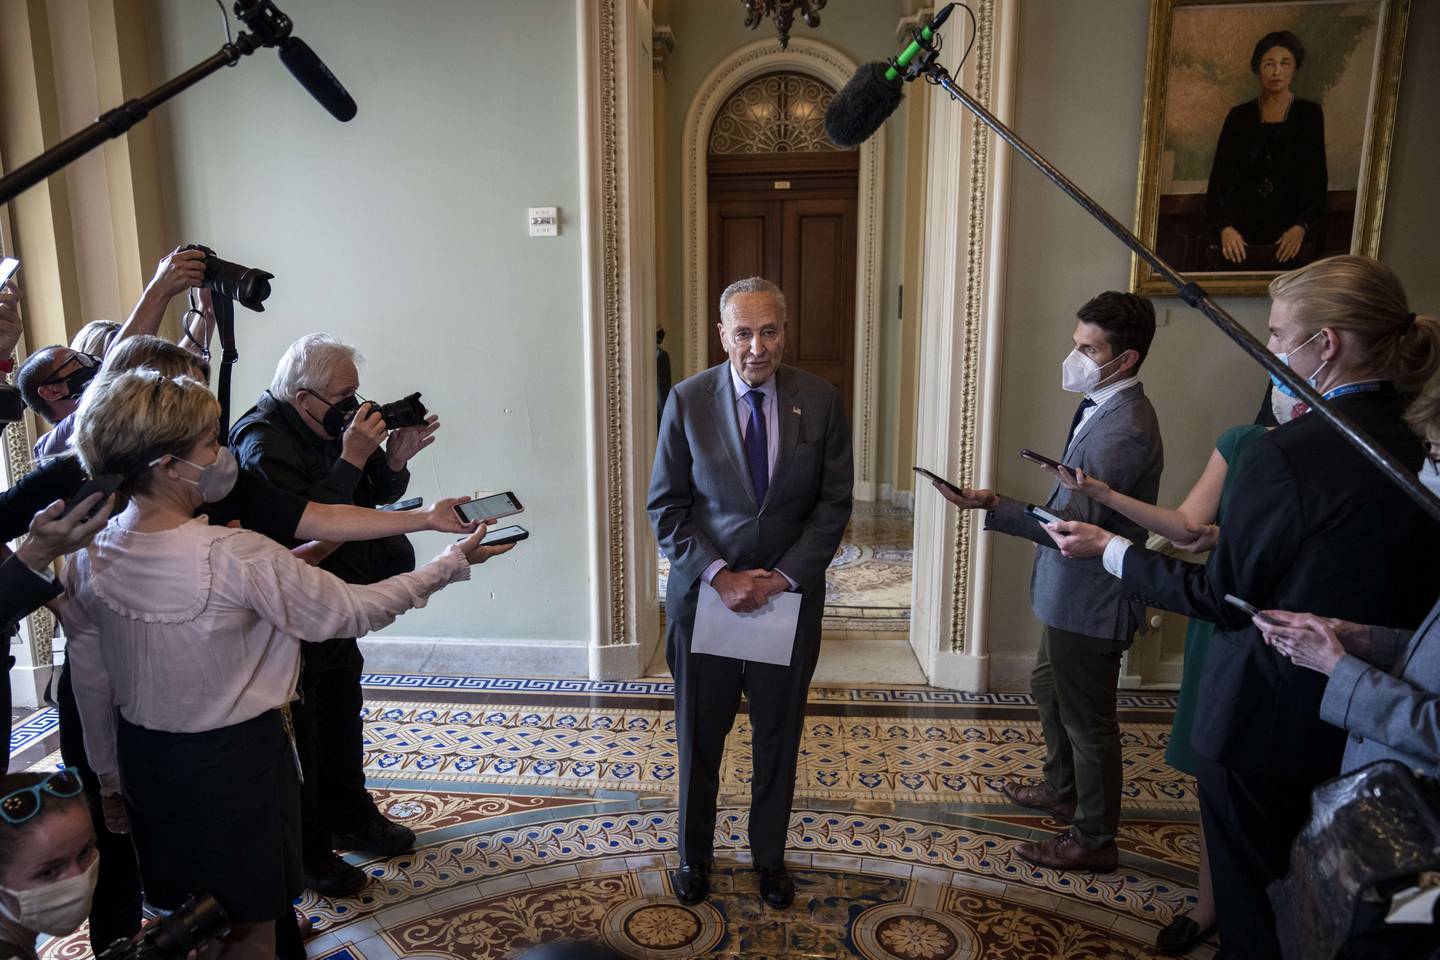 Senate Majority Leader Chuck Schumer speaks briefly to reporters after a meeting with Senate Democrats at the US Capitol on July 28, 2021 in Washington. AFP